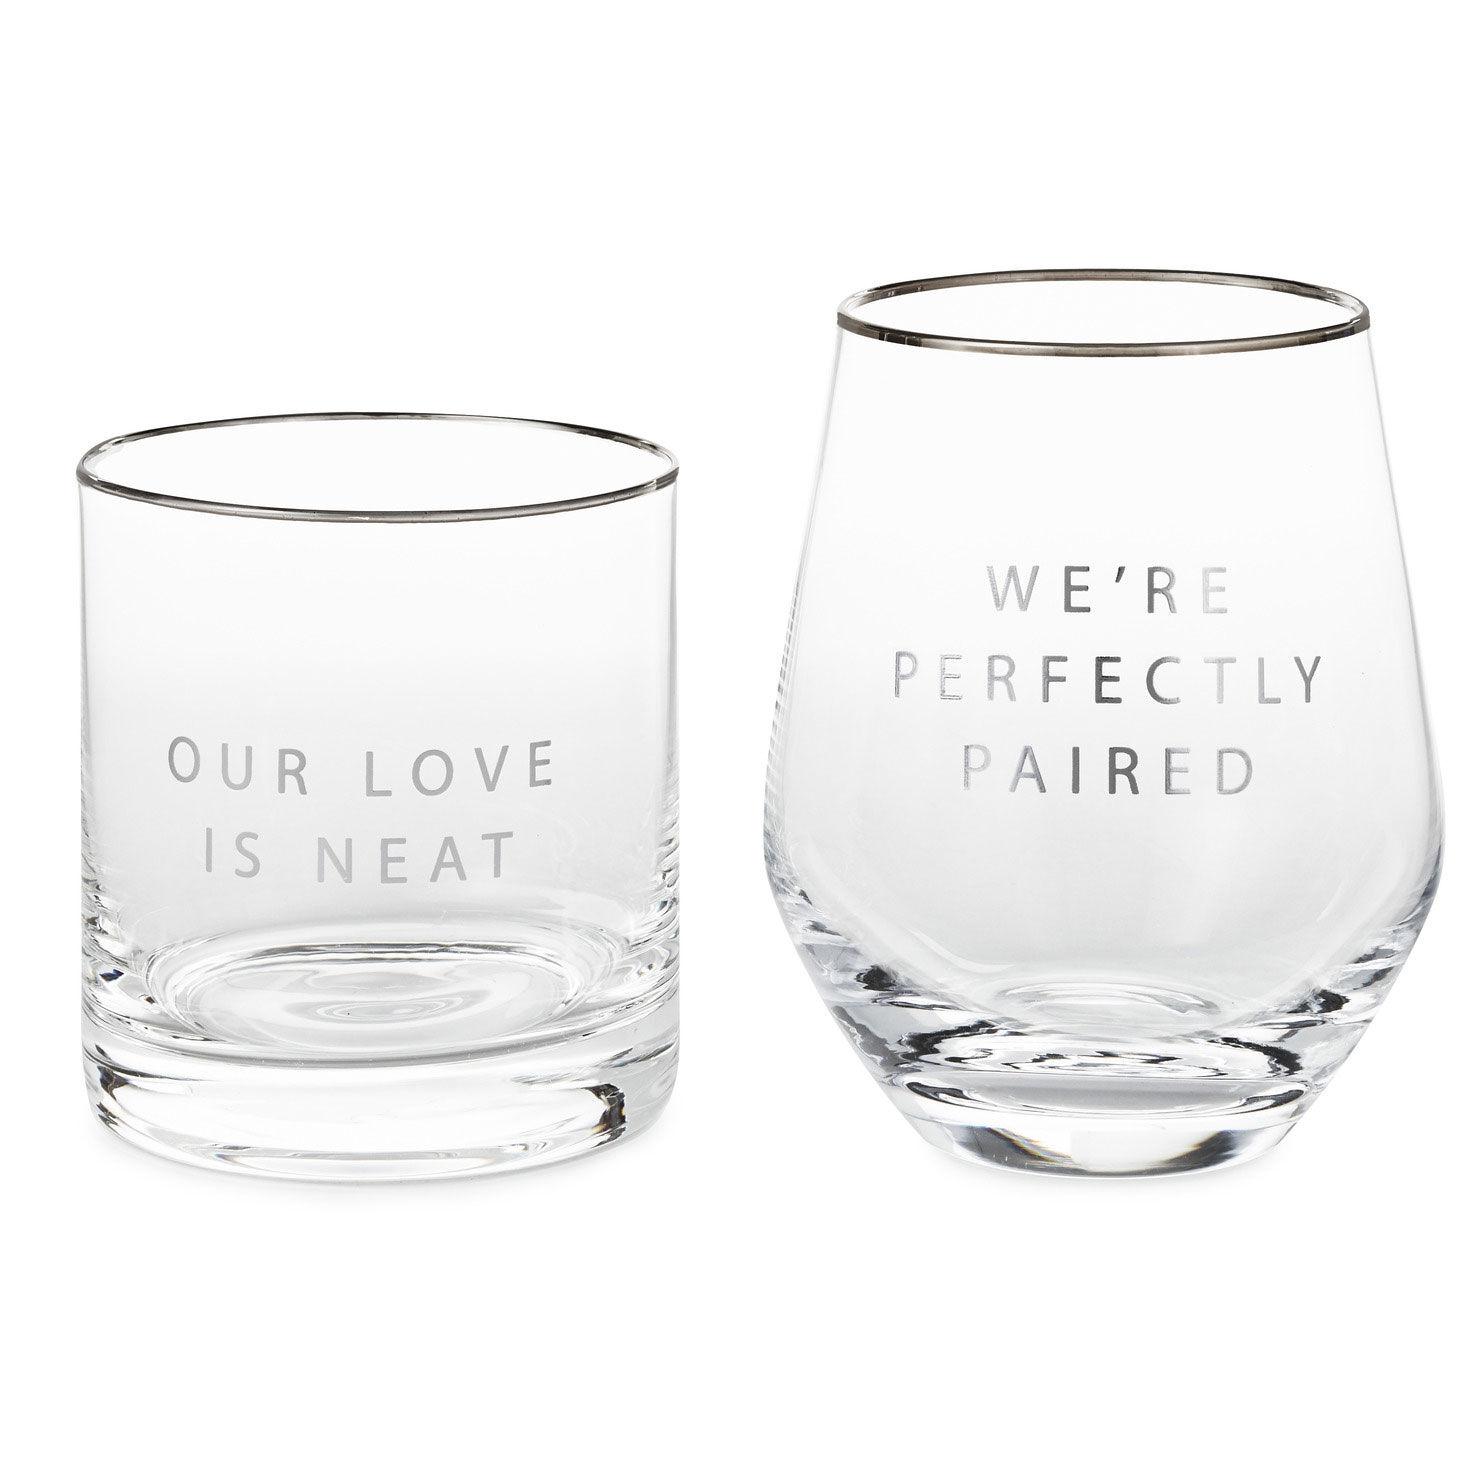 Lowball Glassware for the Perfect Drink